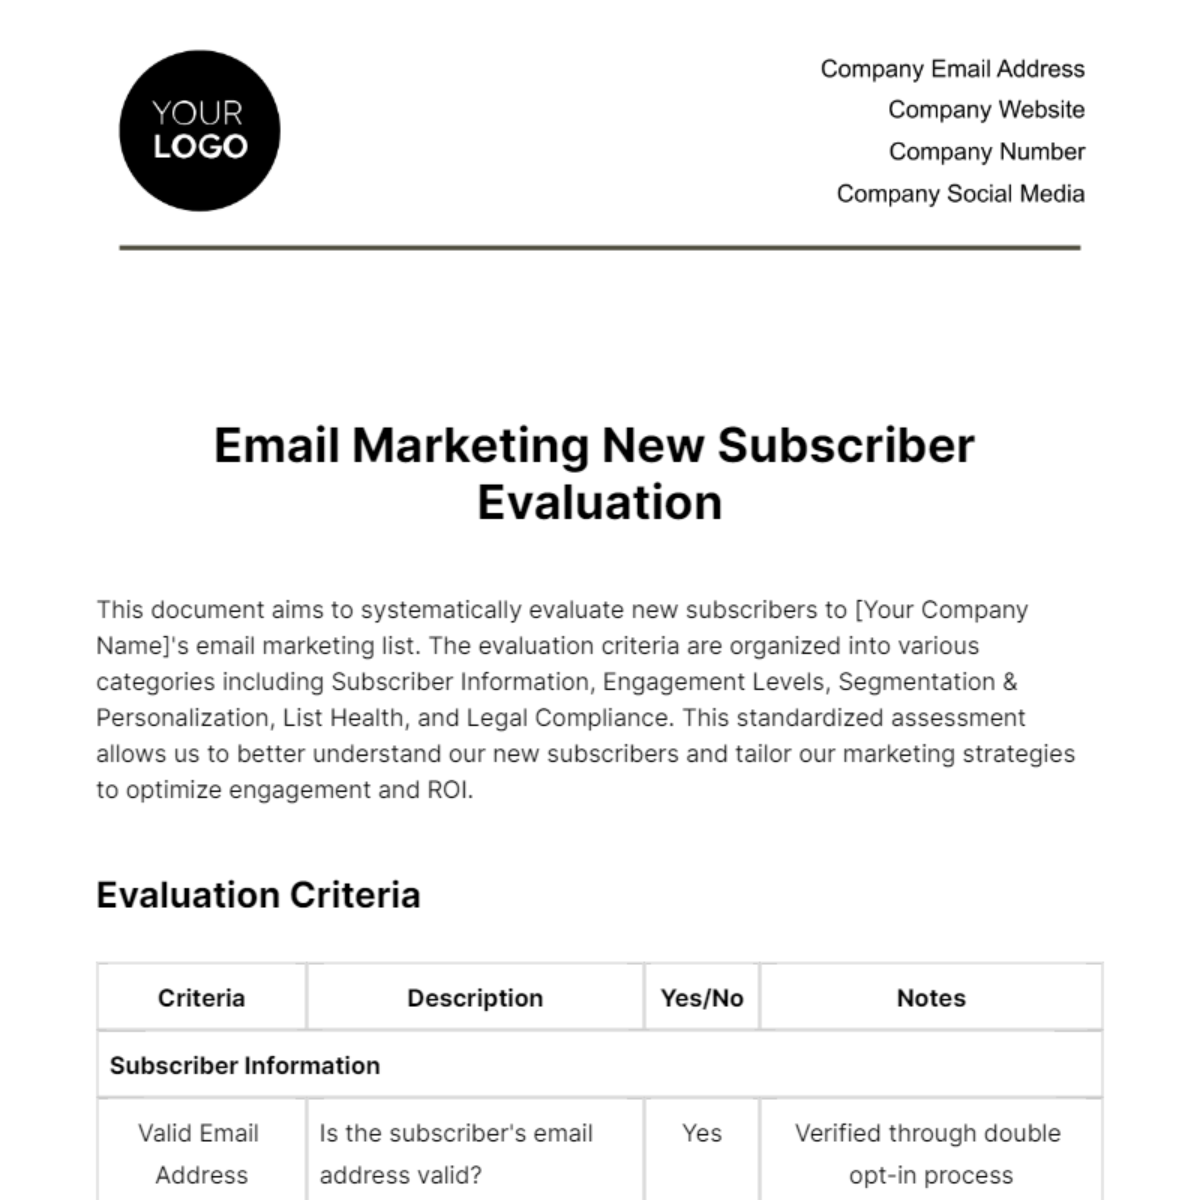 Email Marketing New Subscriber Evaluation Template